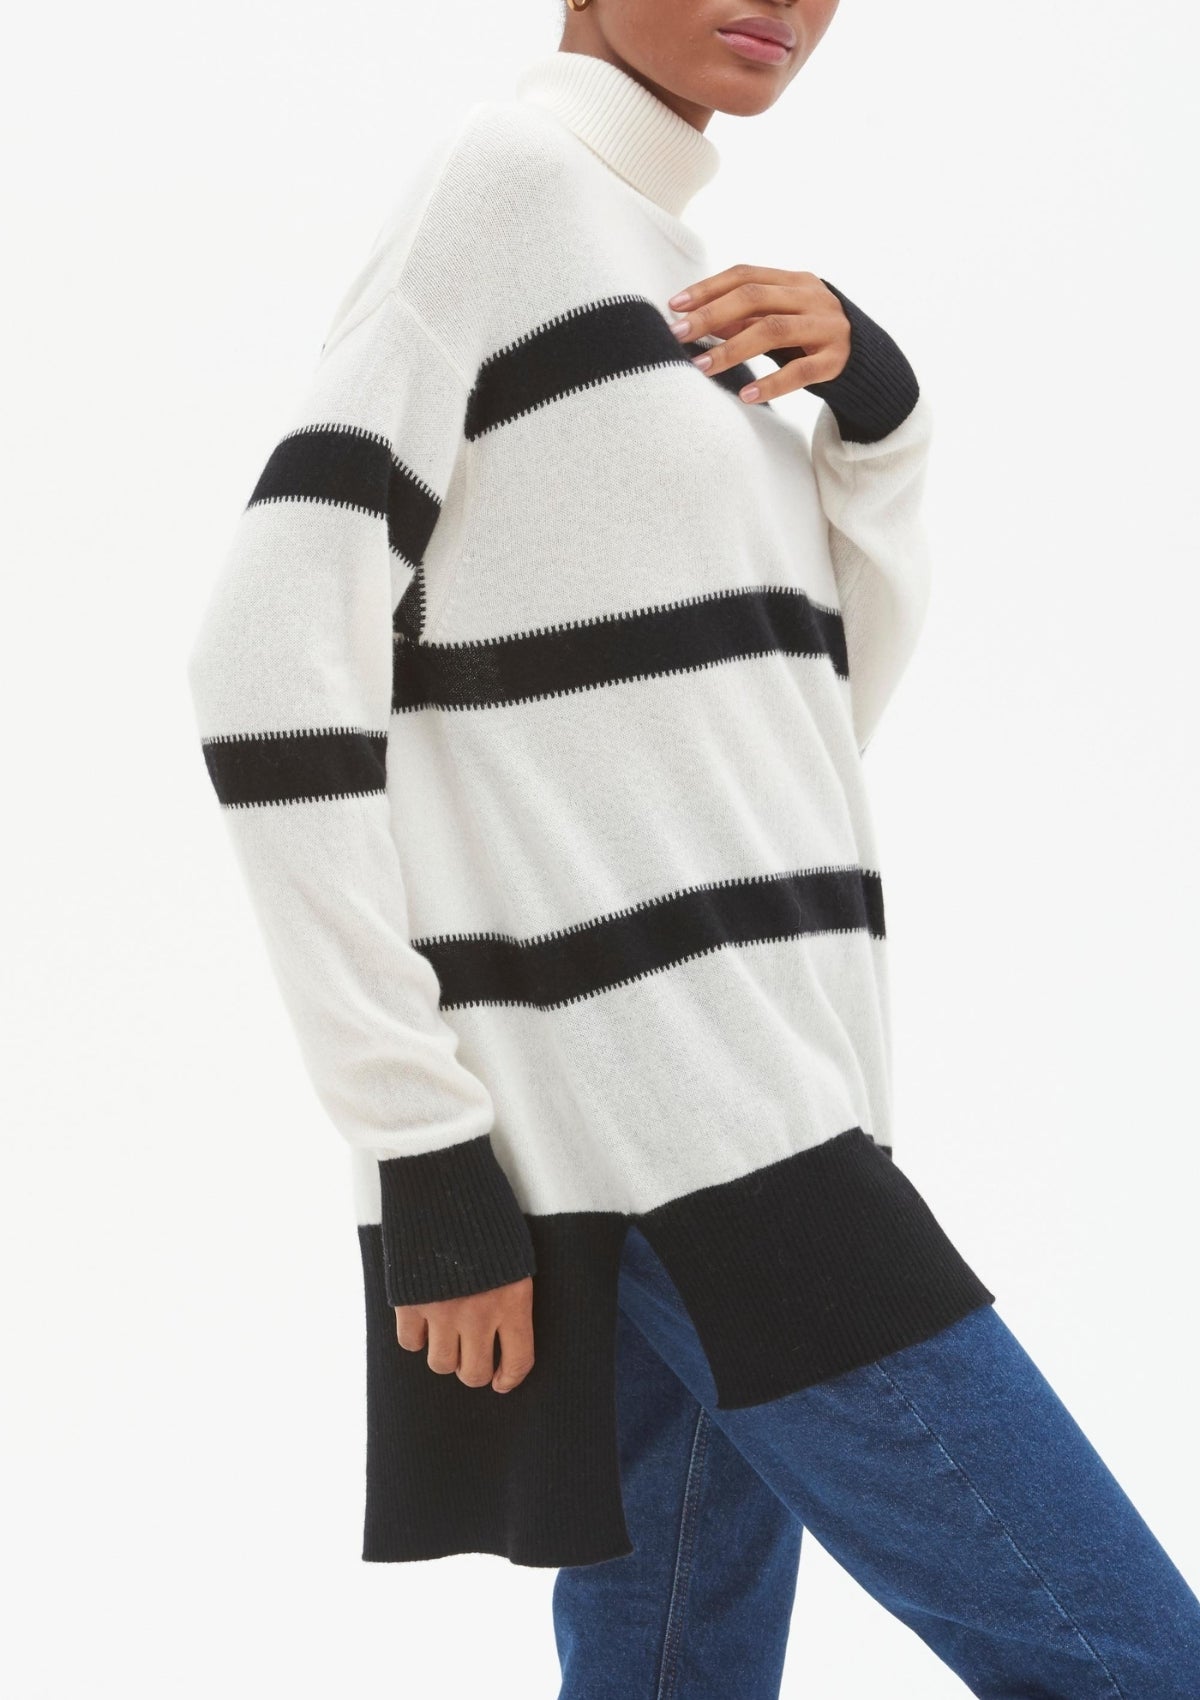 Relaxed Polo Neck Cashmere Sweater in Black/Snow Stripe